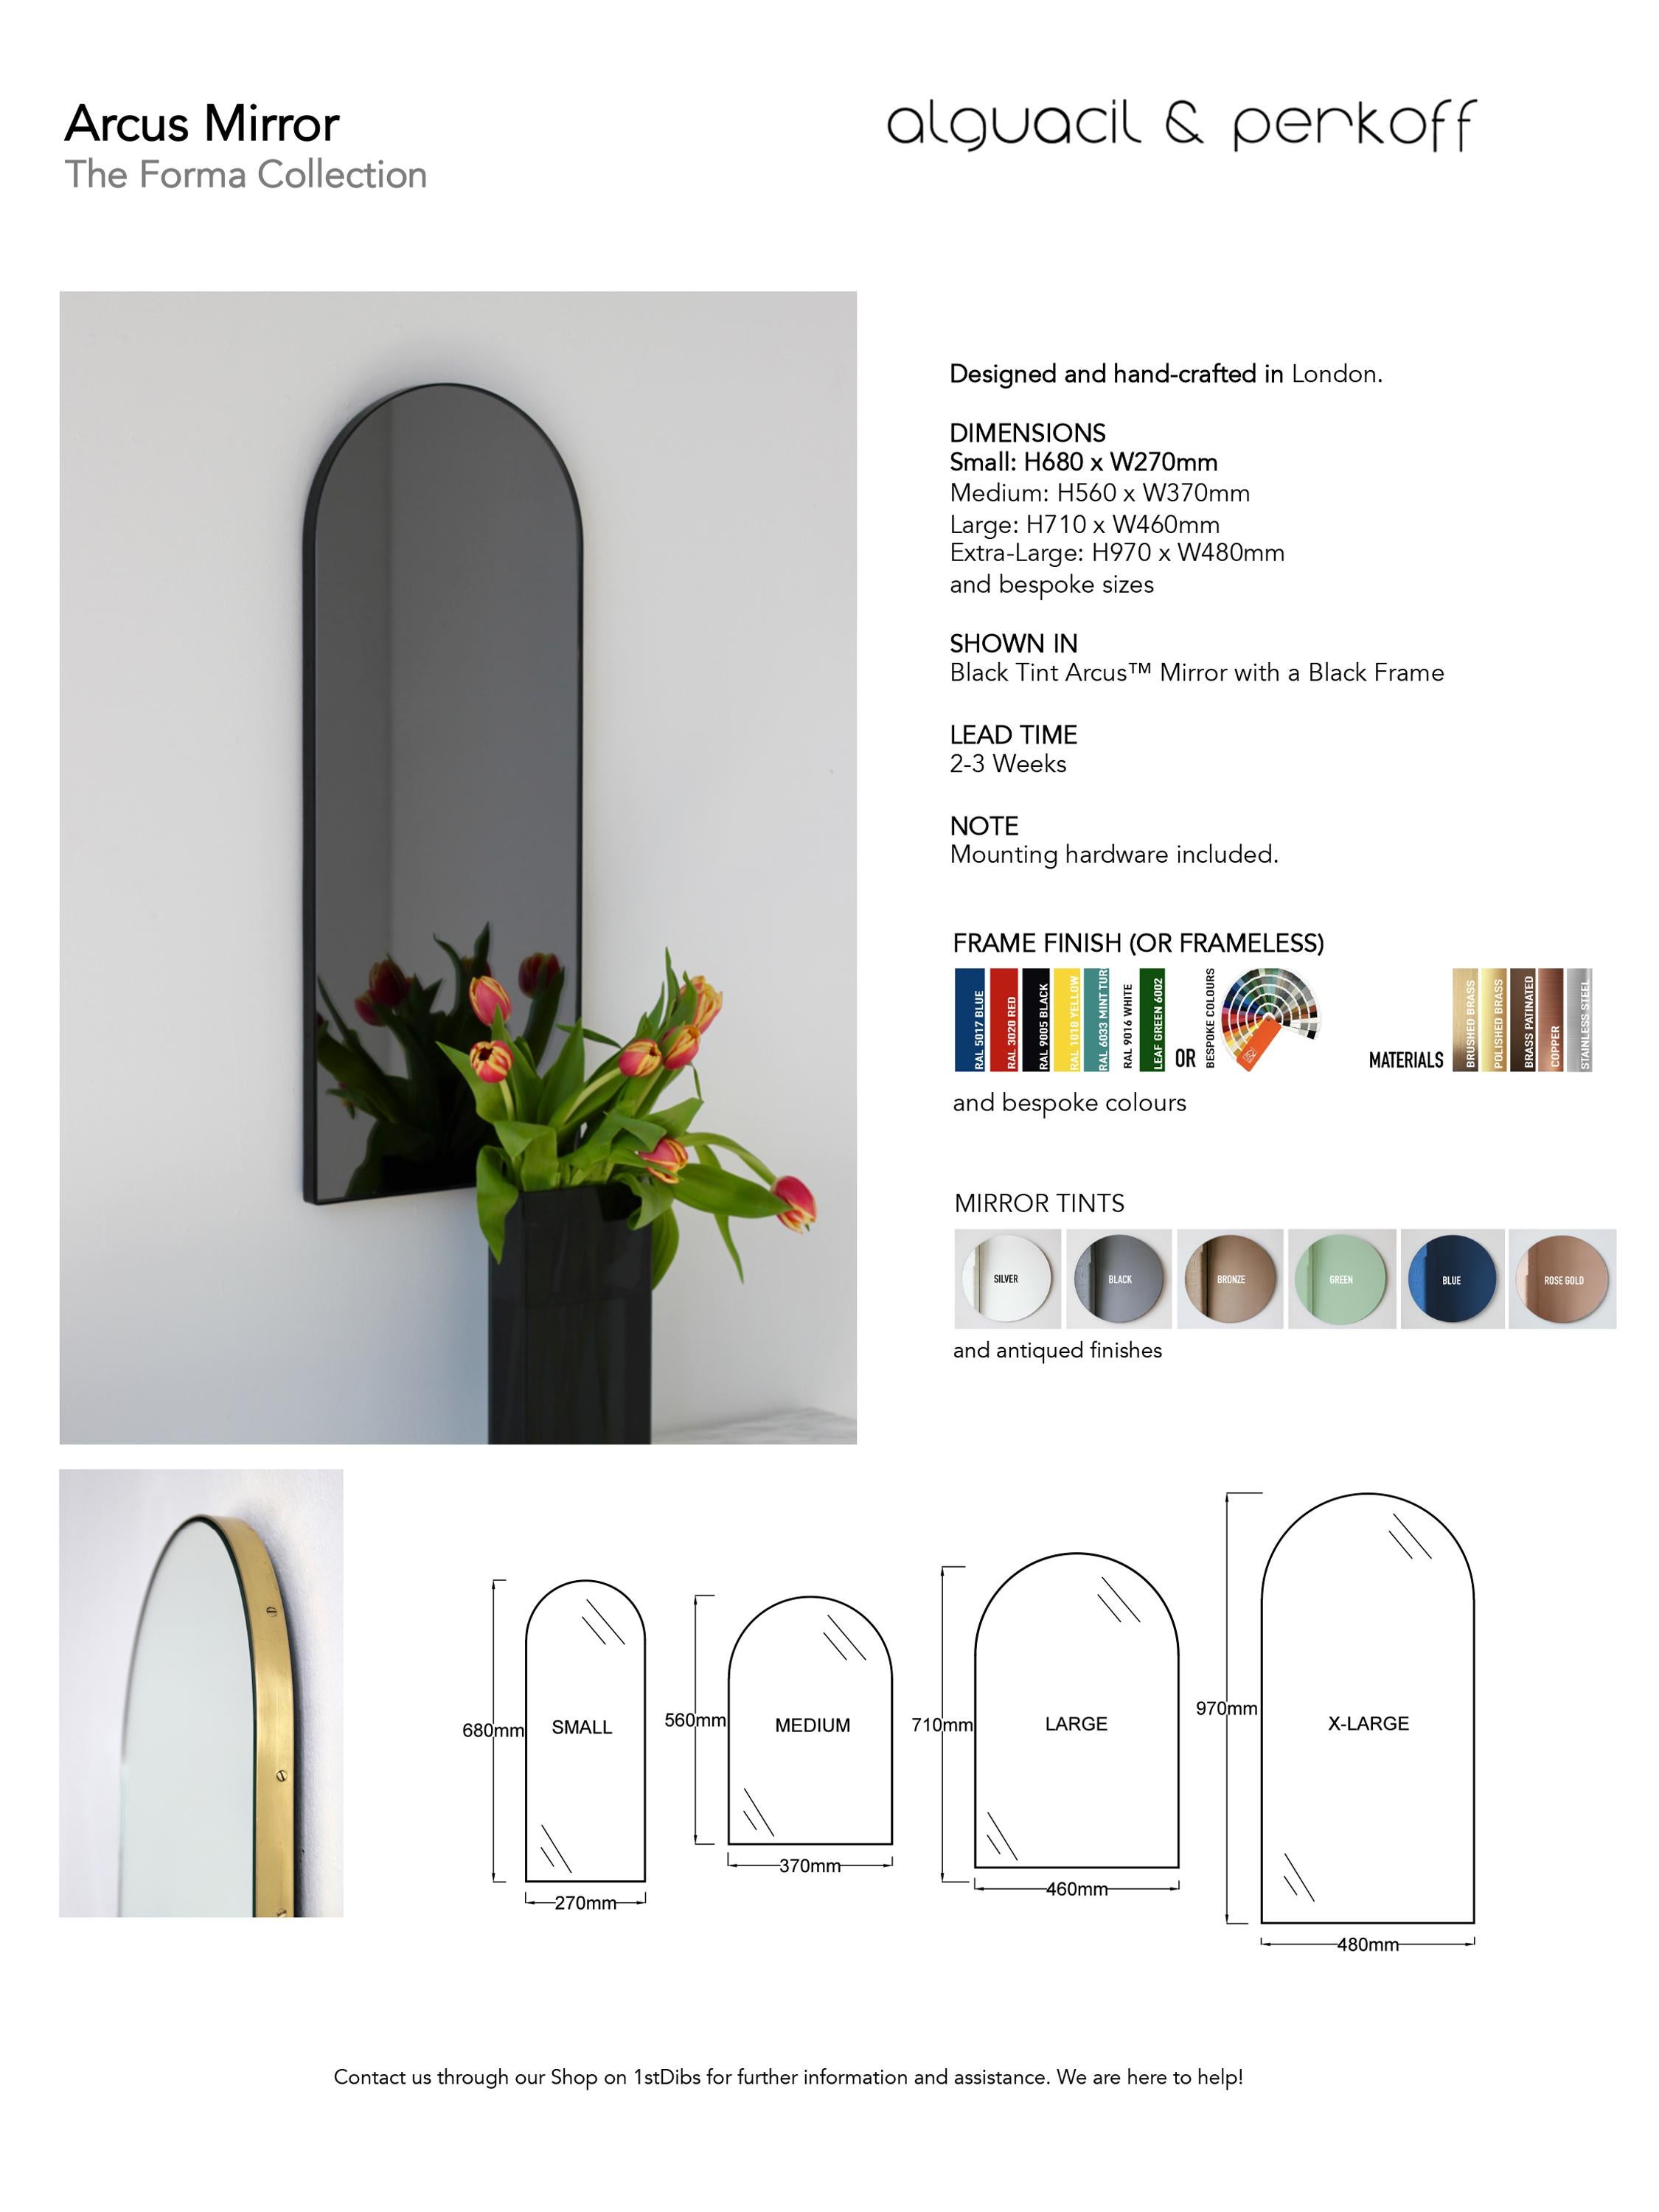 Arcus Arch shaped Modern Contemporary Versatile Frameless Mirror, Large For Sale 9